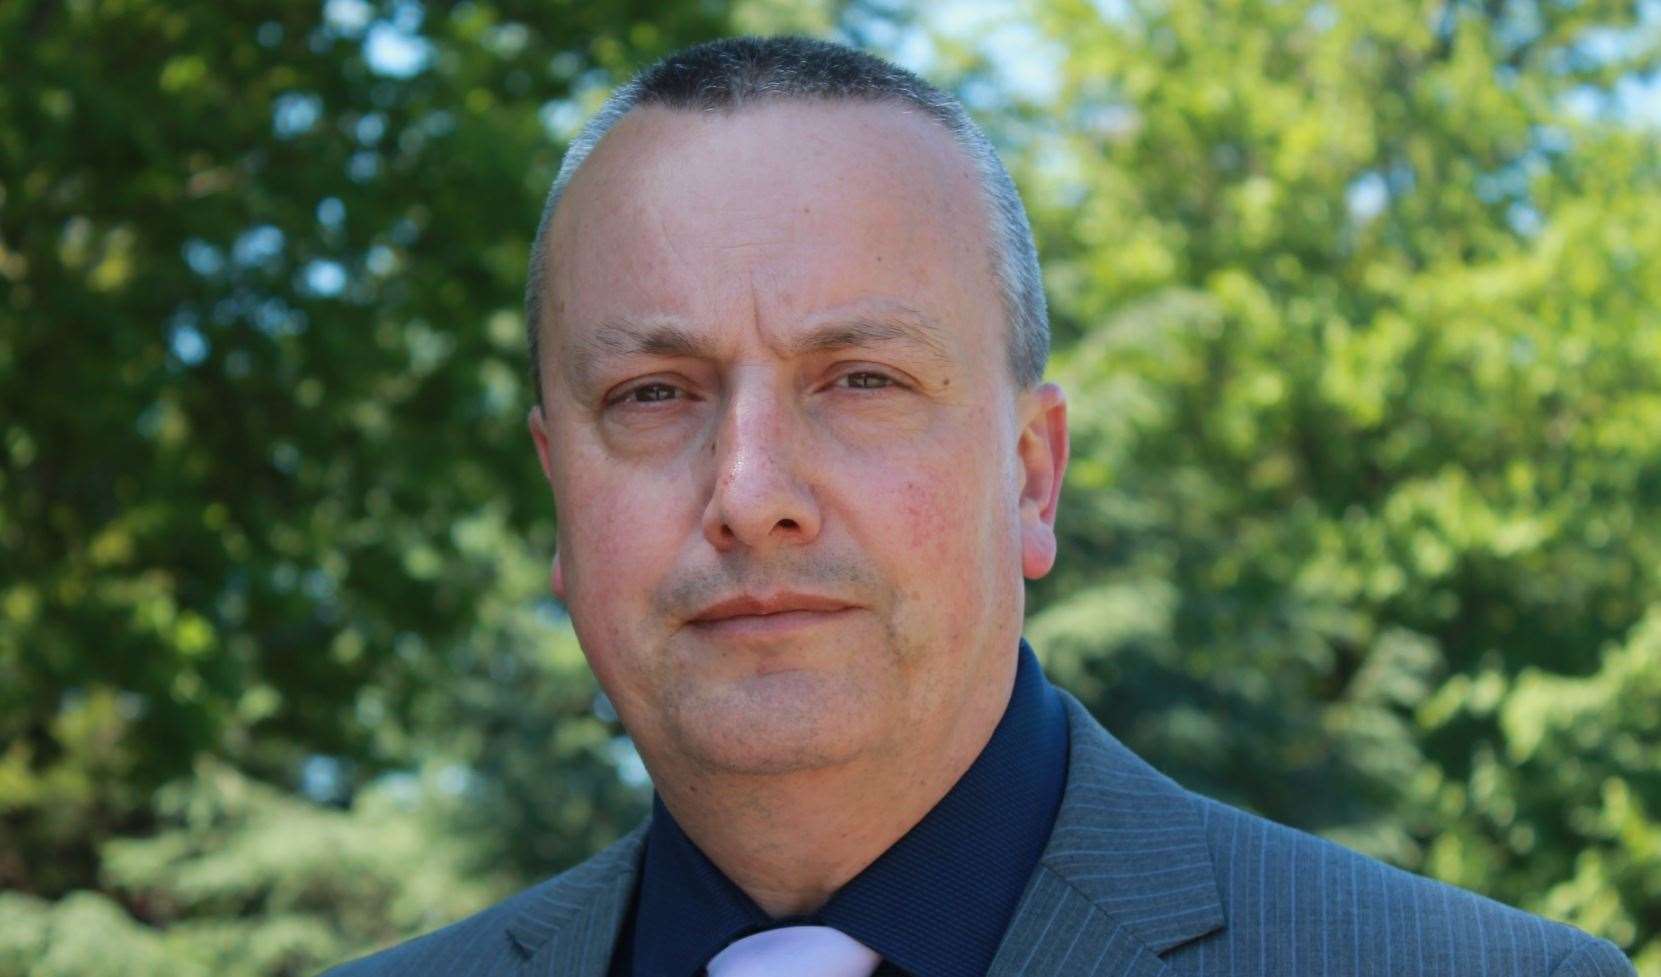 Neil Mennie, chairman of the Kent Police Federation